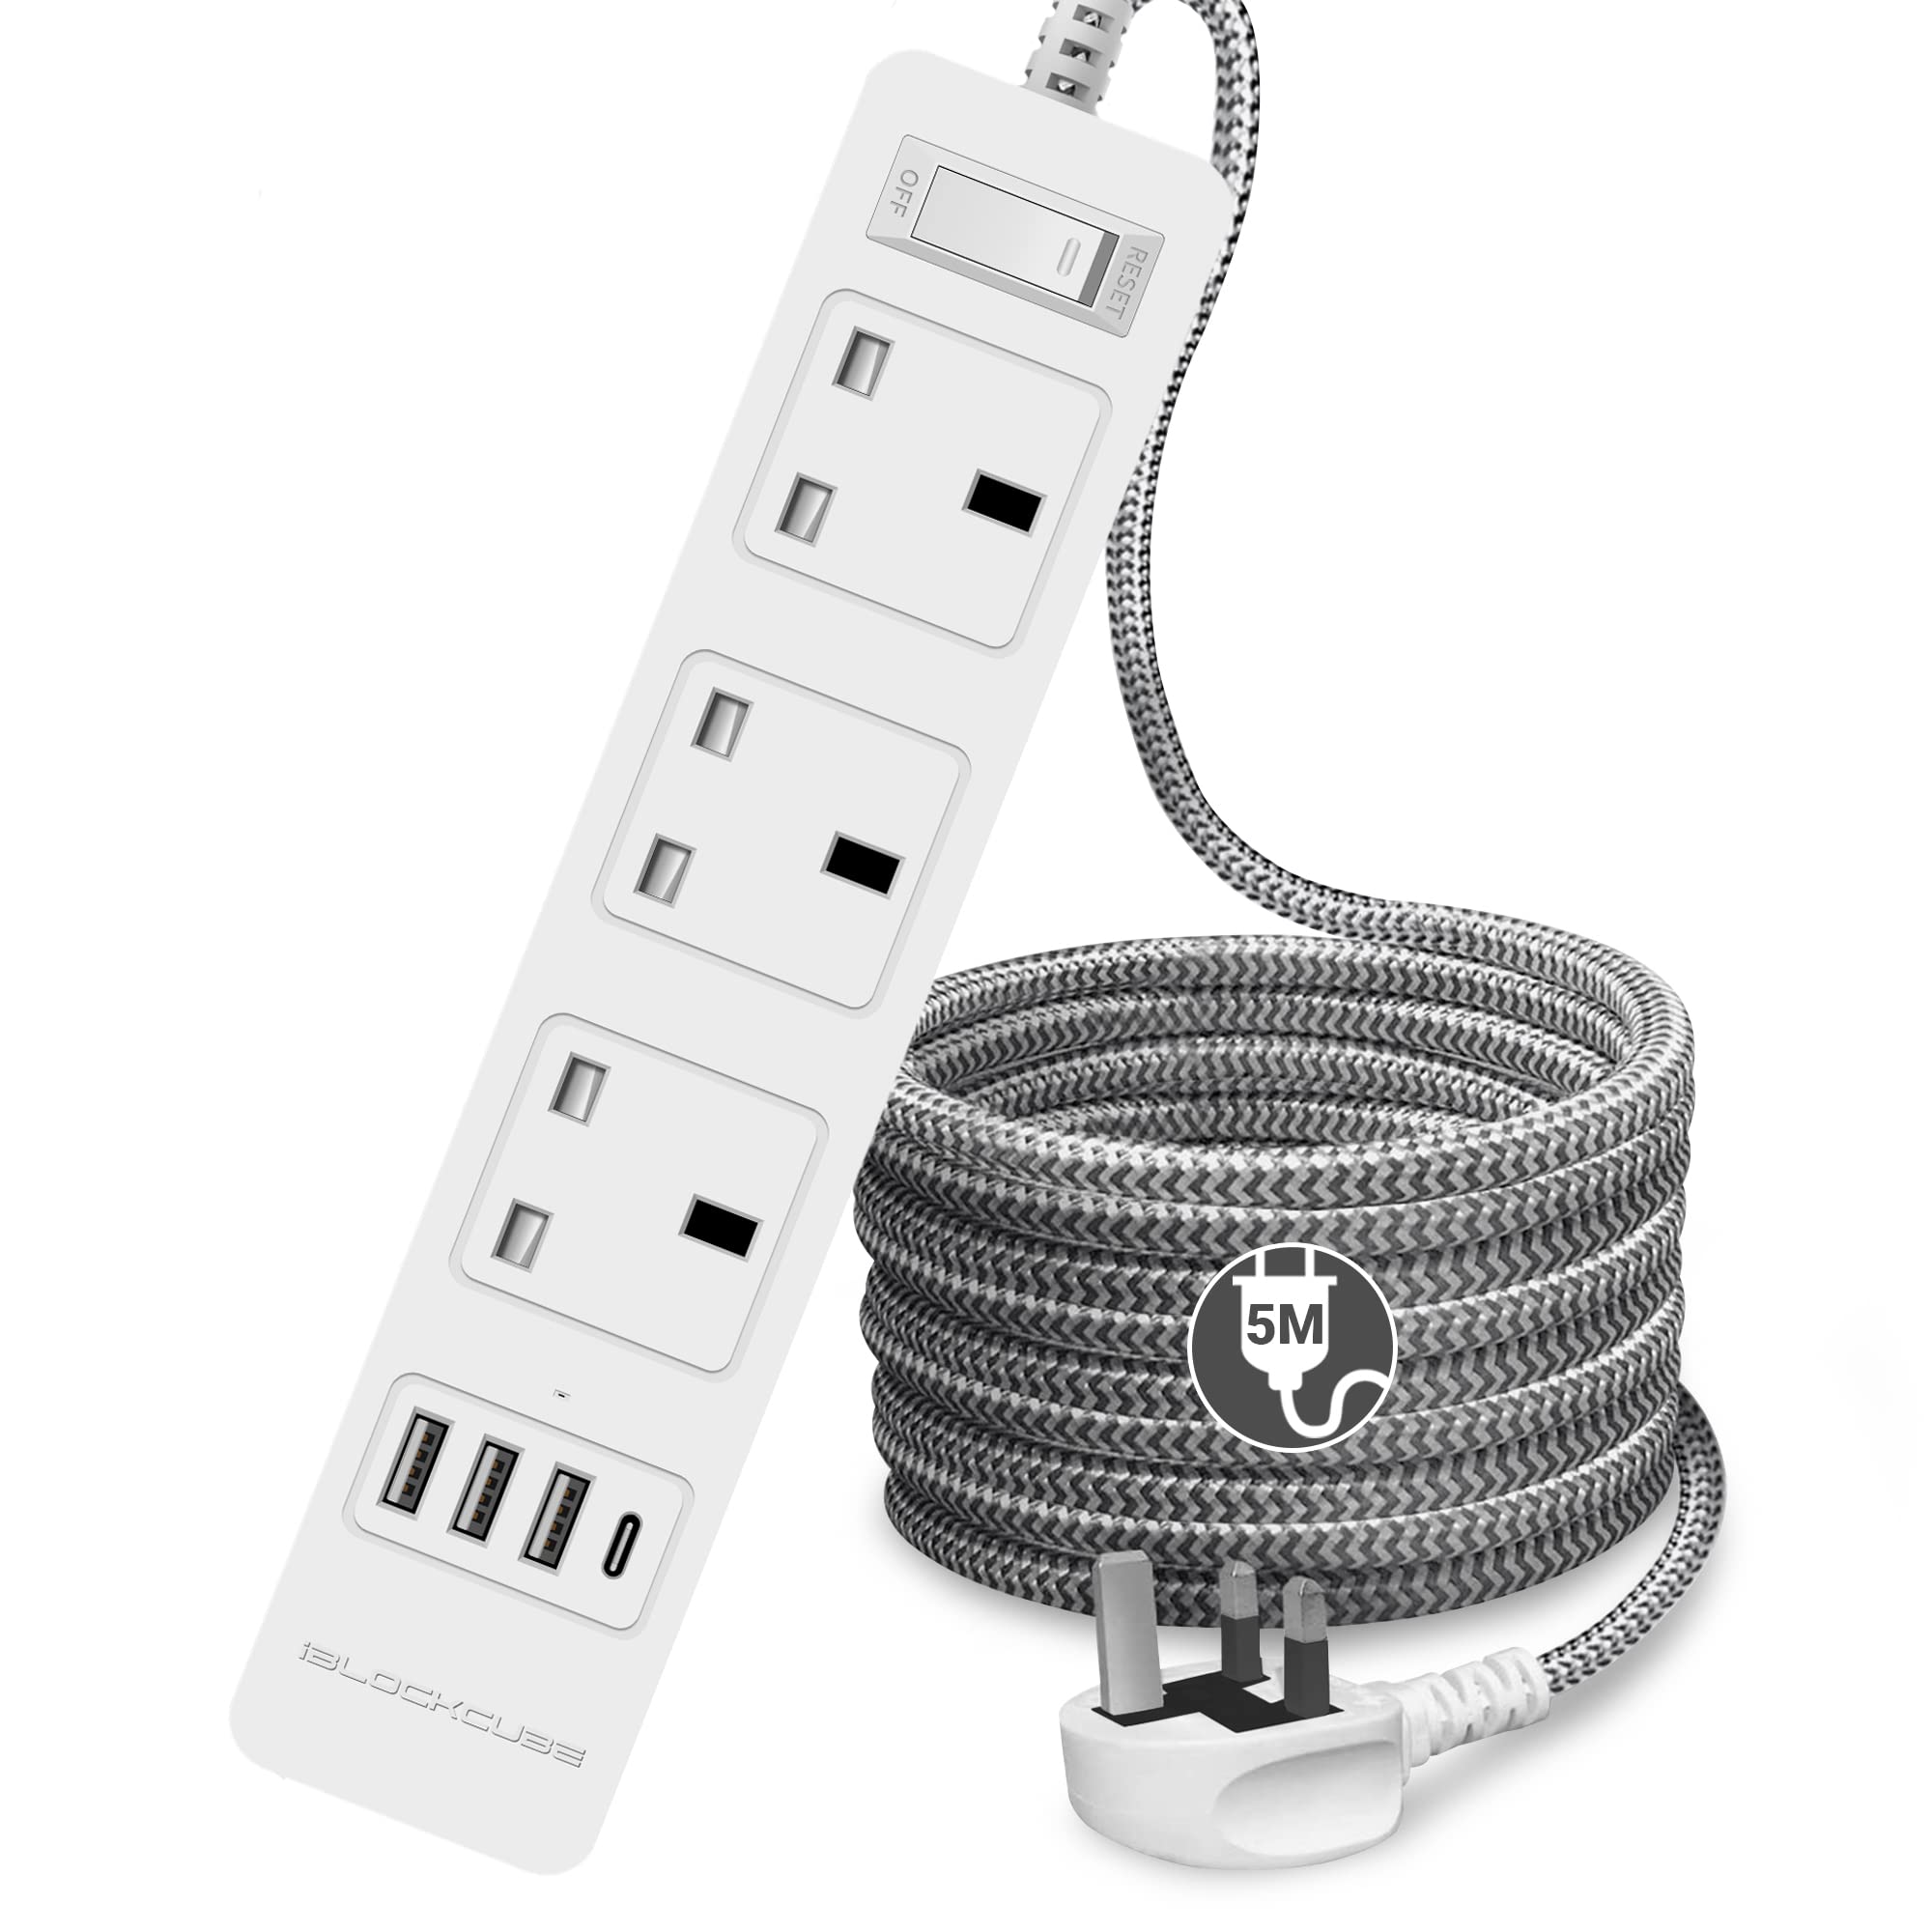 iBlockCube 3 Way Extension Lead with 3 USB-A Slots and 1 USB-C Slots Braided Power Strip Cord, 13A UK Plug Extension, Charging Station, Surge Protected 5M/16.4FT Cable Fuse Protector & Shutter - White